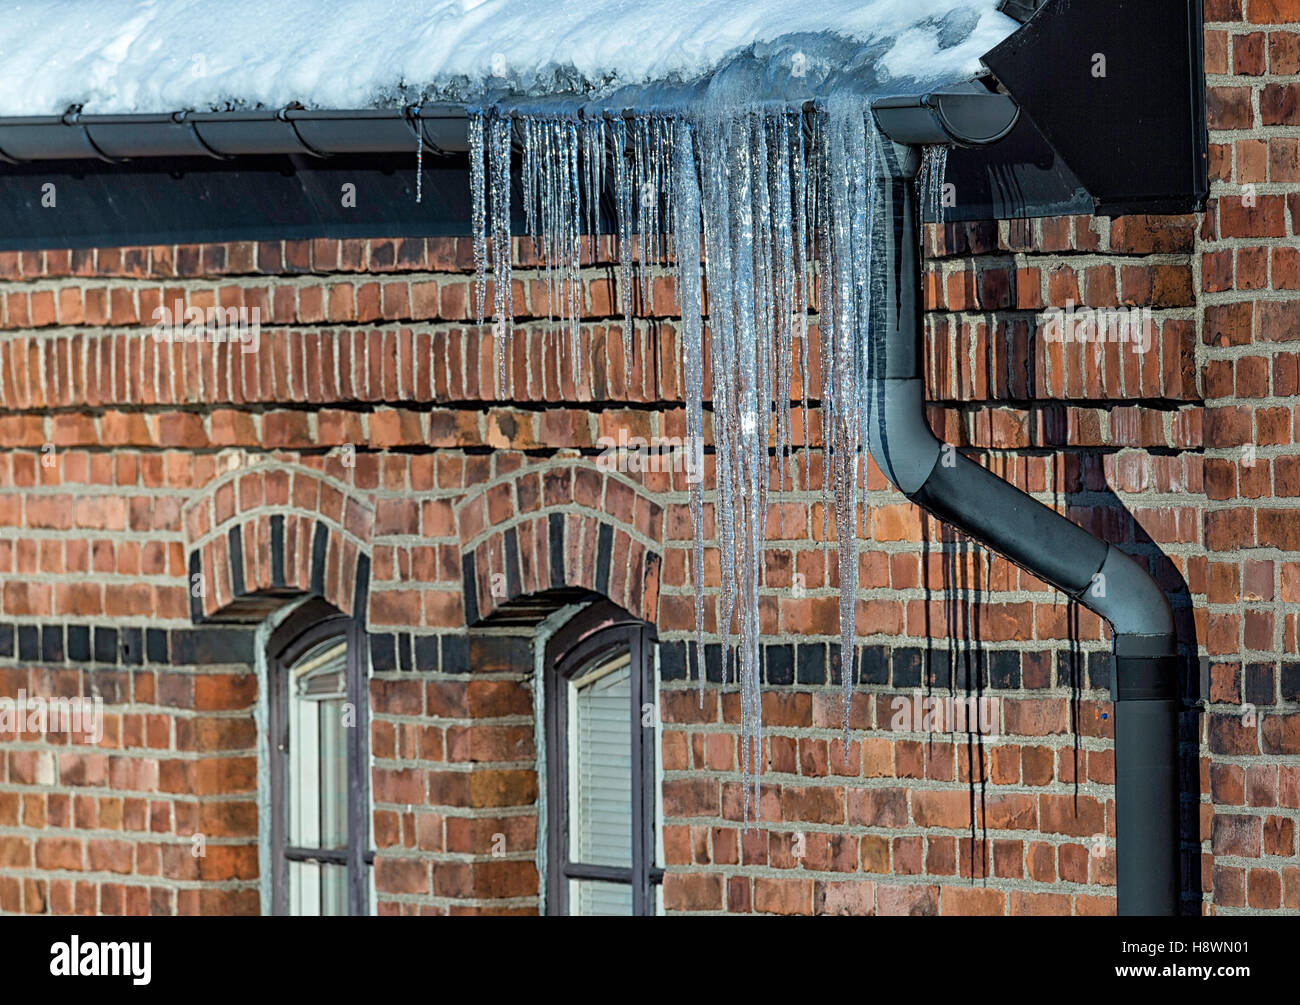 ice needles with Water Spout with brick walled building. Stock Photo